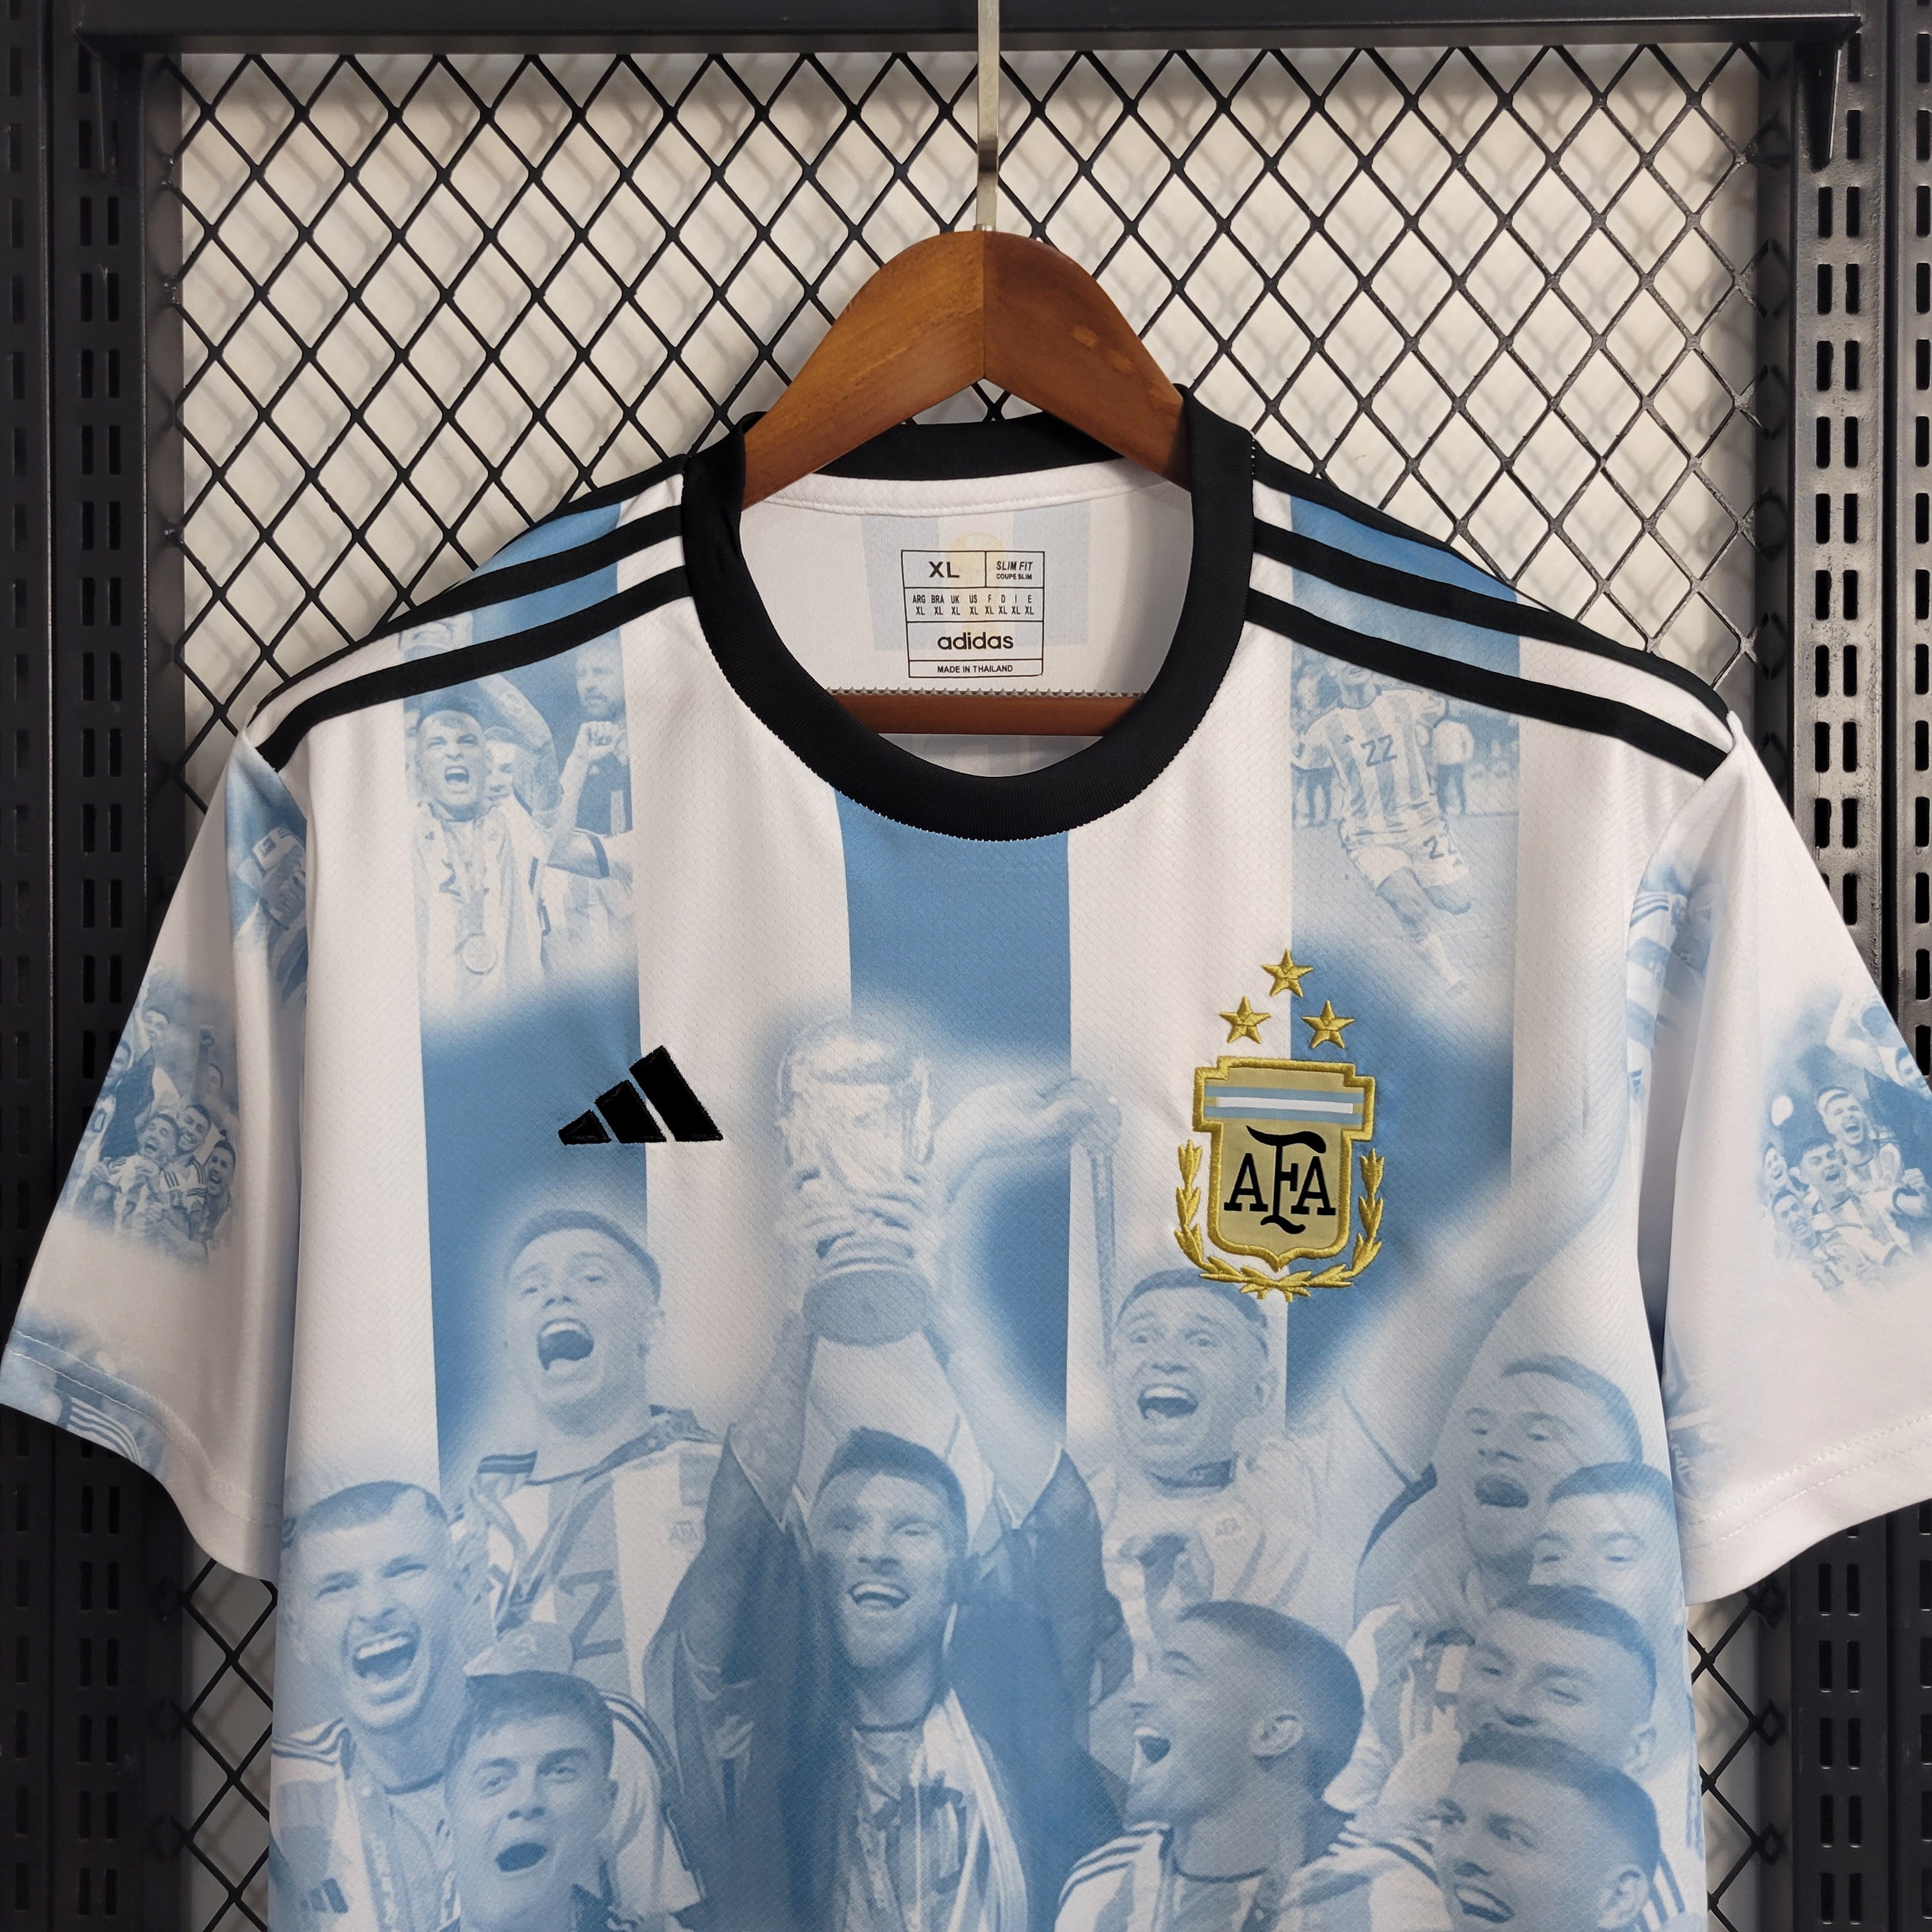 Argentina World Cup Winners Name Jersey